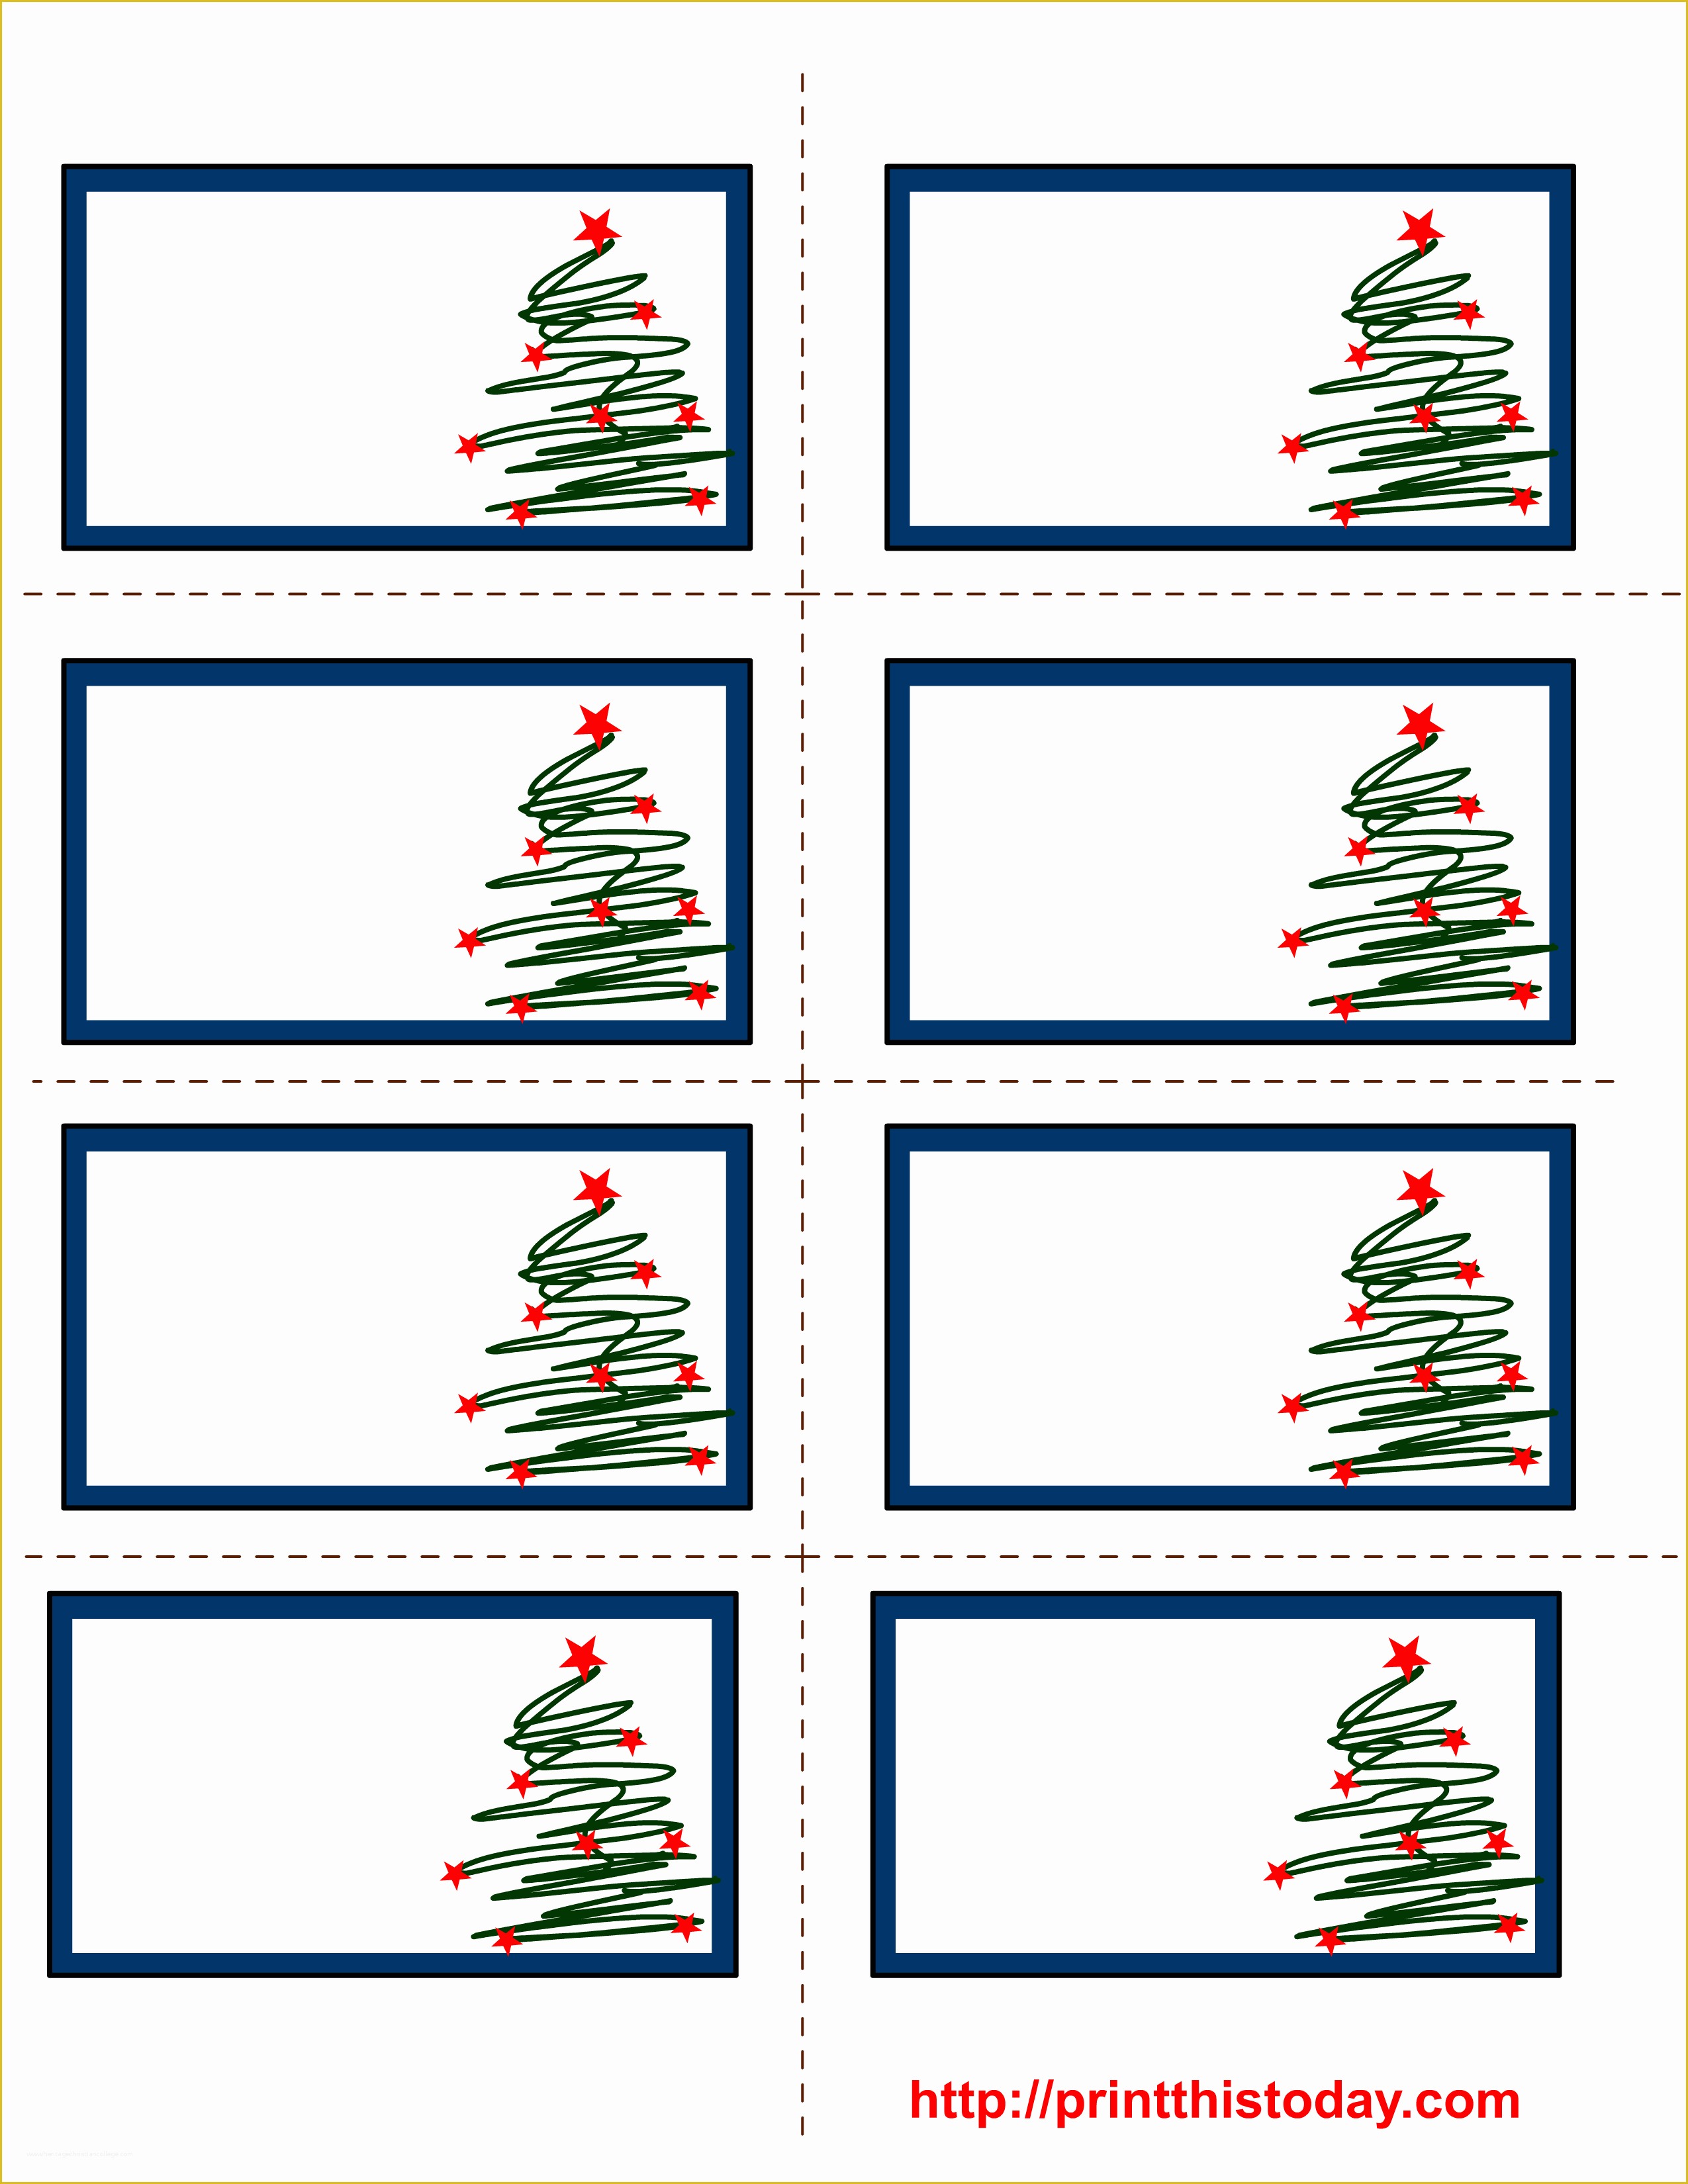 Free Christmas Return Address Label Templates 30 Per Sheet Of Staples Mailing Labels 5160 Made by Creative Label